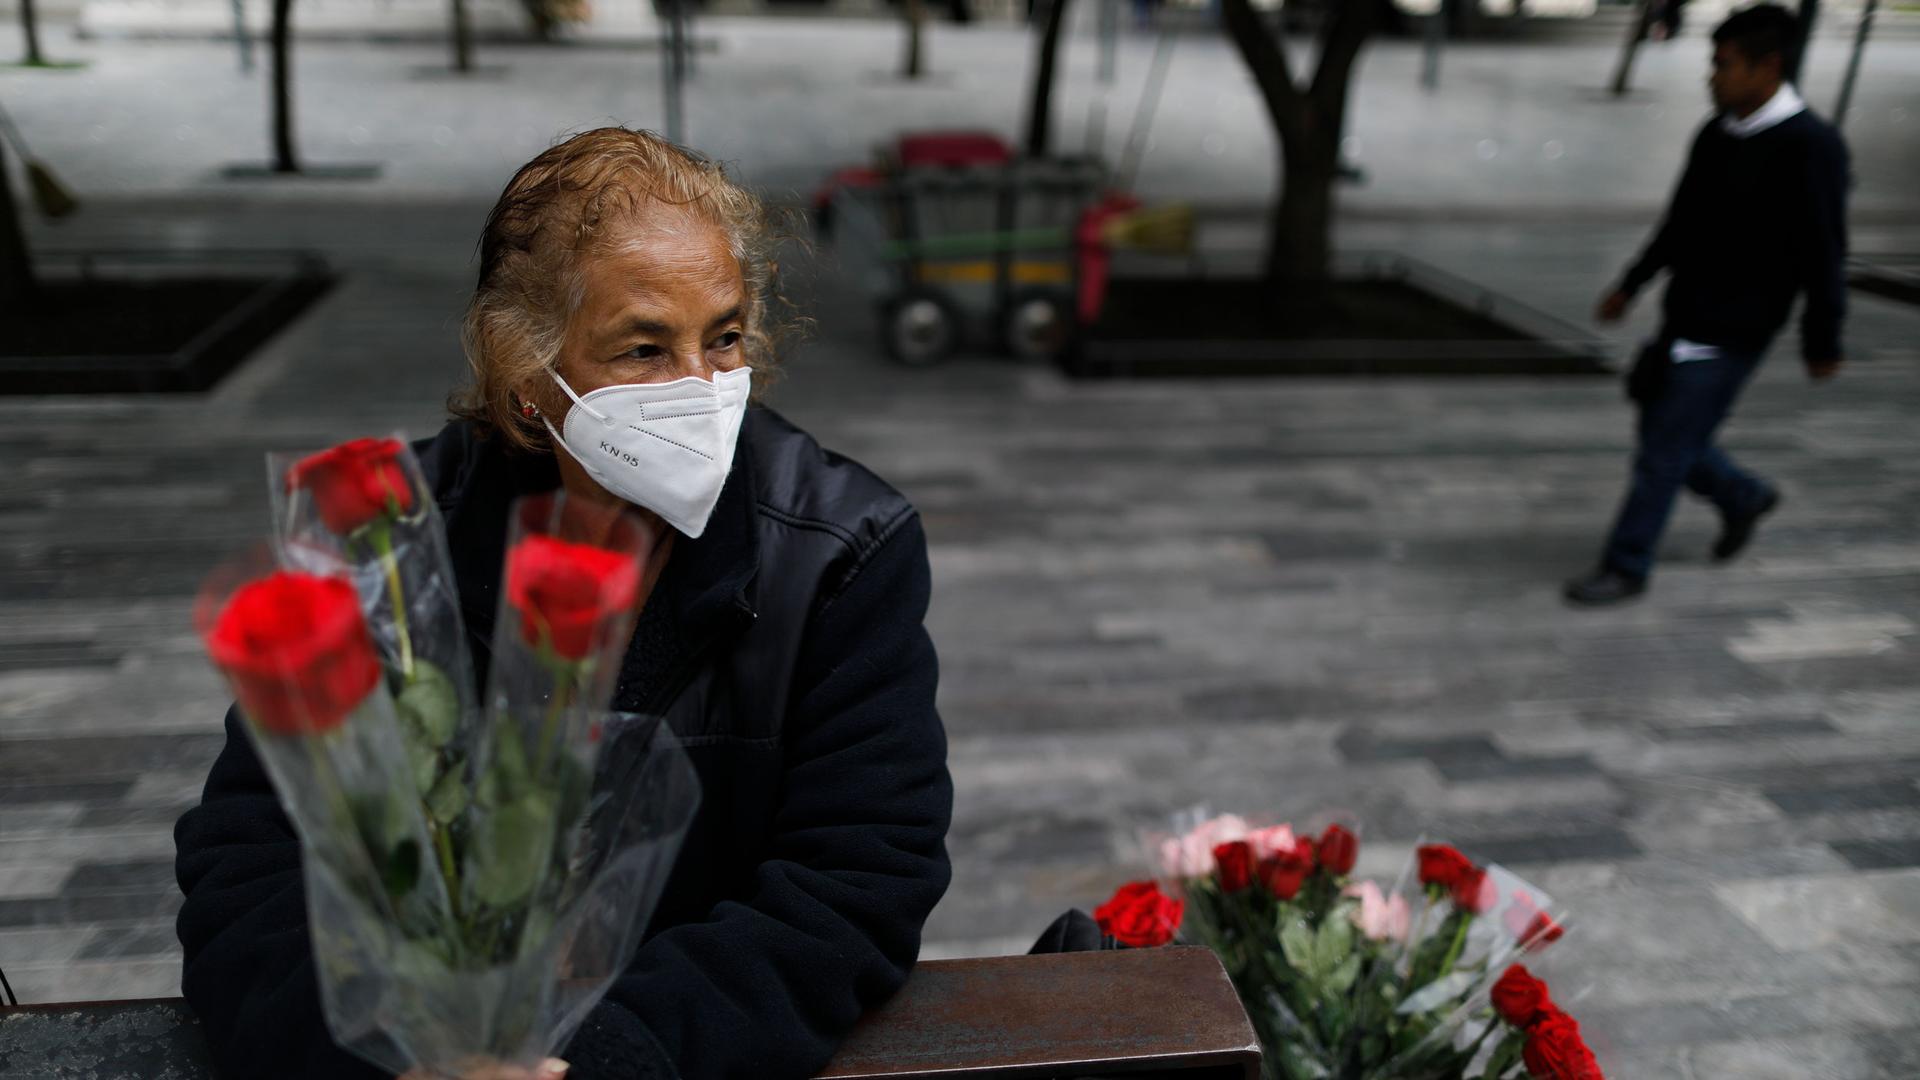 A woman is shown sitting on a metal bench and holding three red roses while wearing a protective face mask.